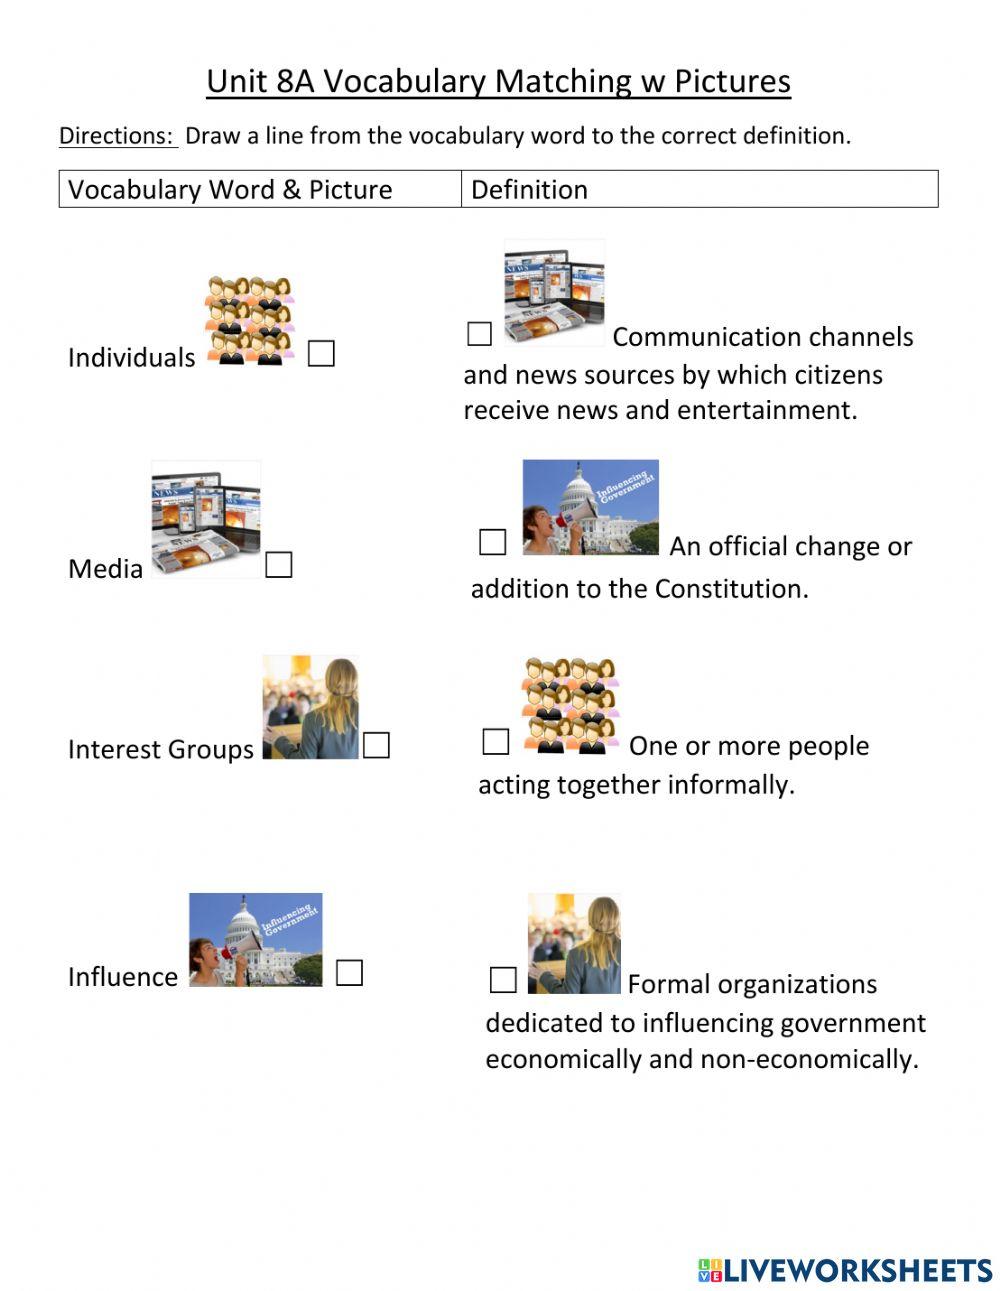 Unit 8A Influences on Government Vocabulary Match w Pictures